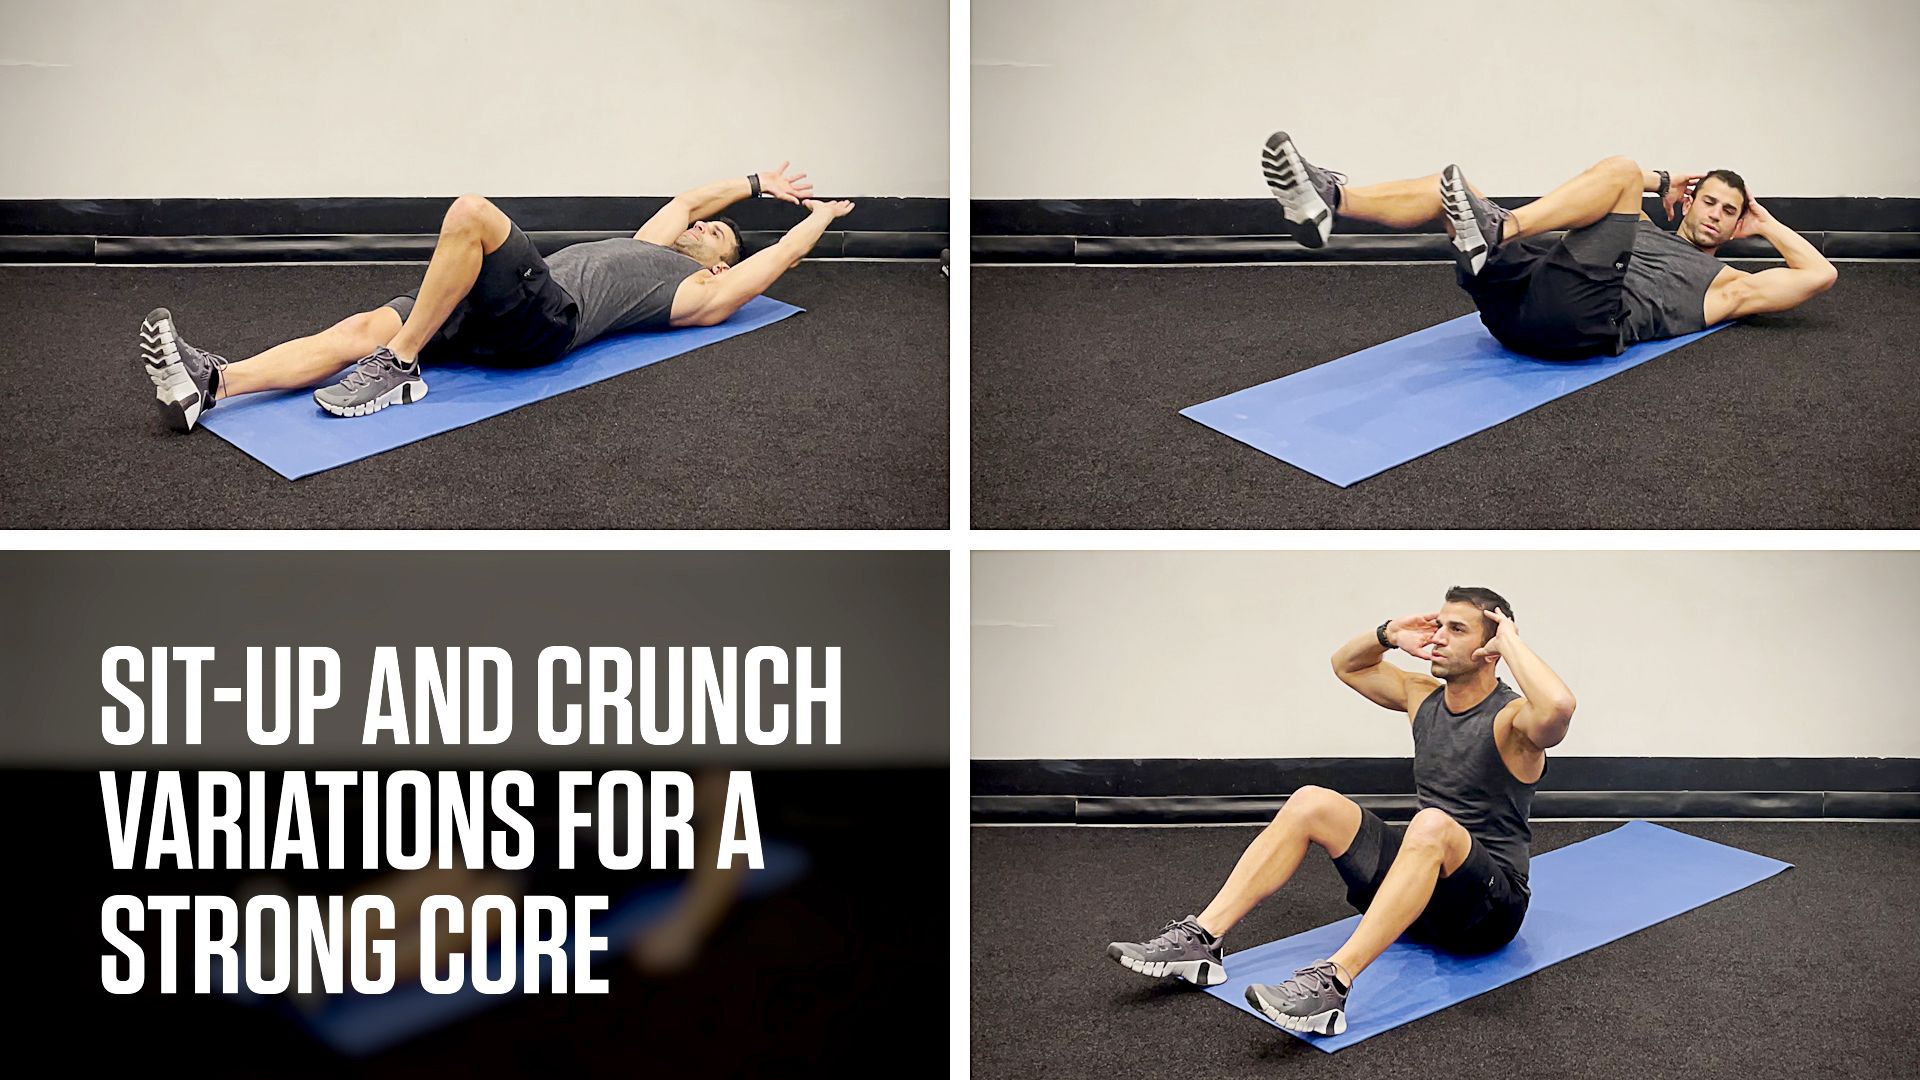 Know the difference between sit ups and crunches